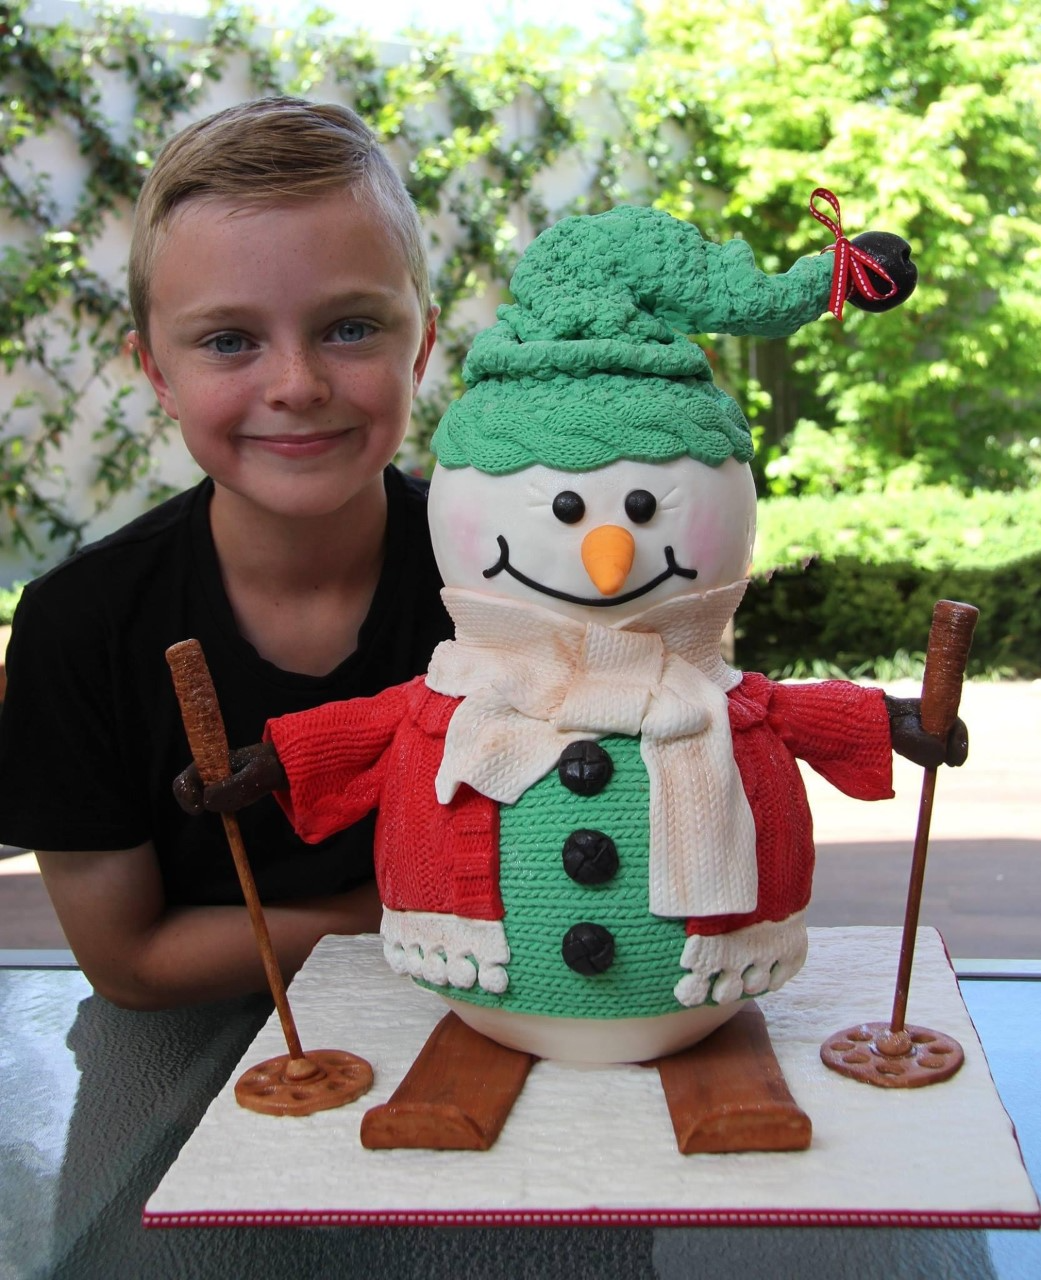 You have to see to believe 12-year-old Ethan's cake creations